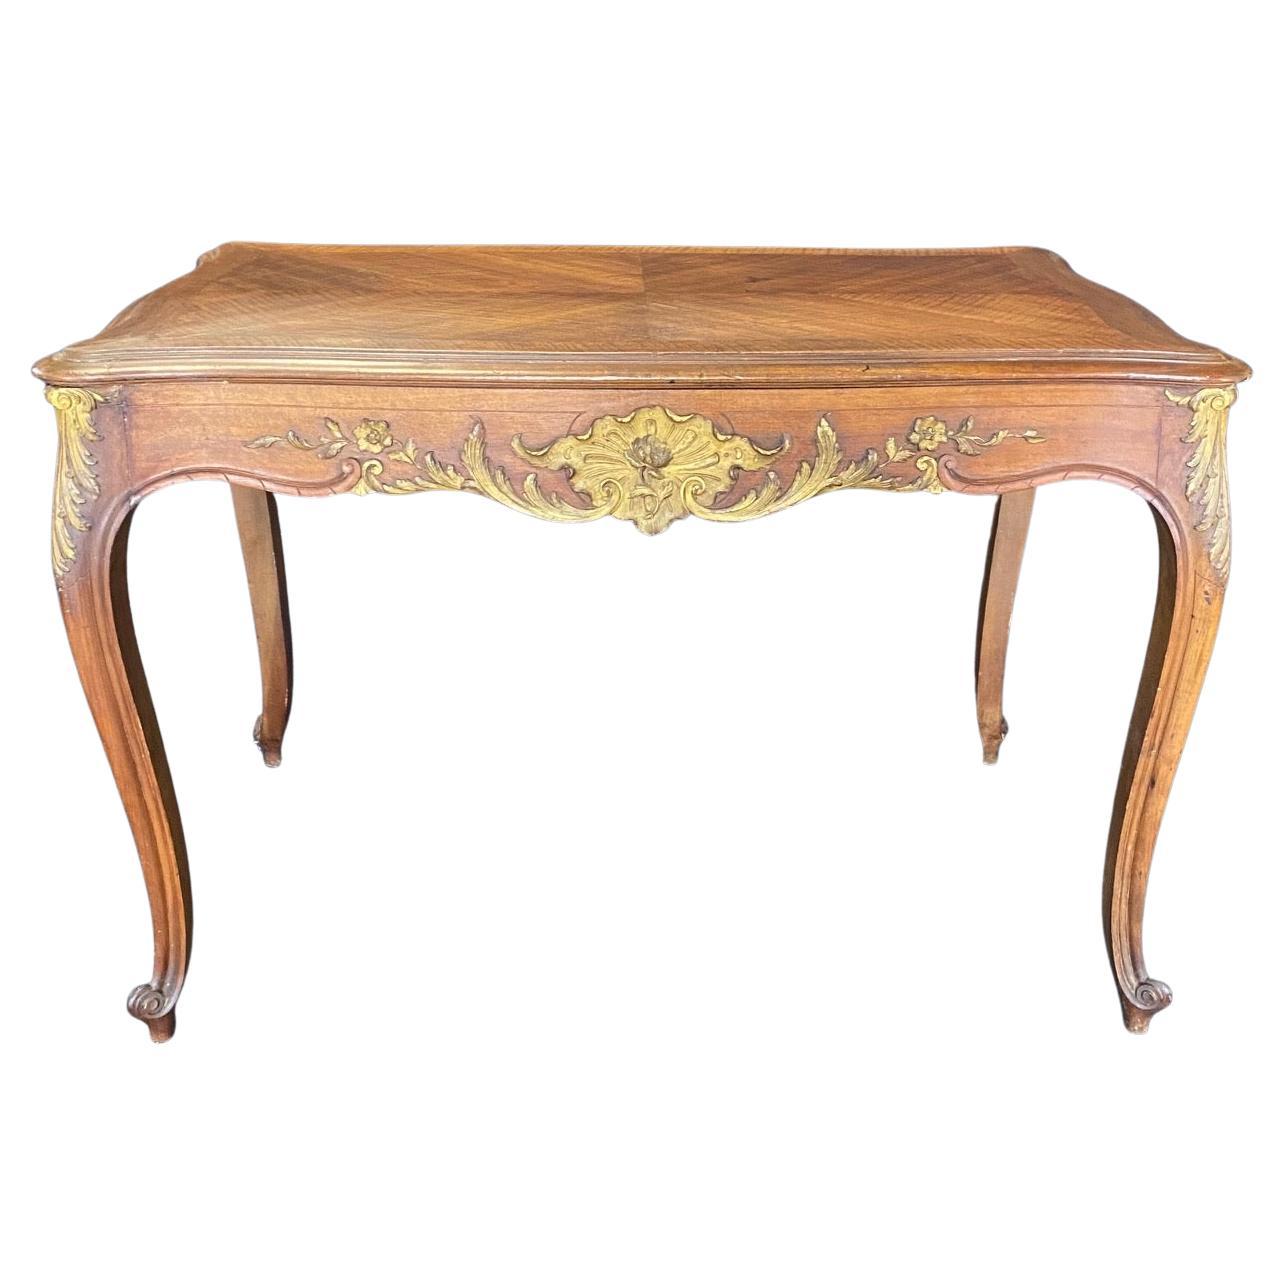  Gorgeous French Louis XV Carved Walnut Side Table or Desk with Gold Gilt